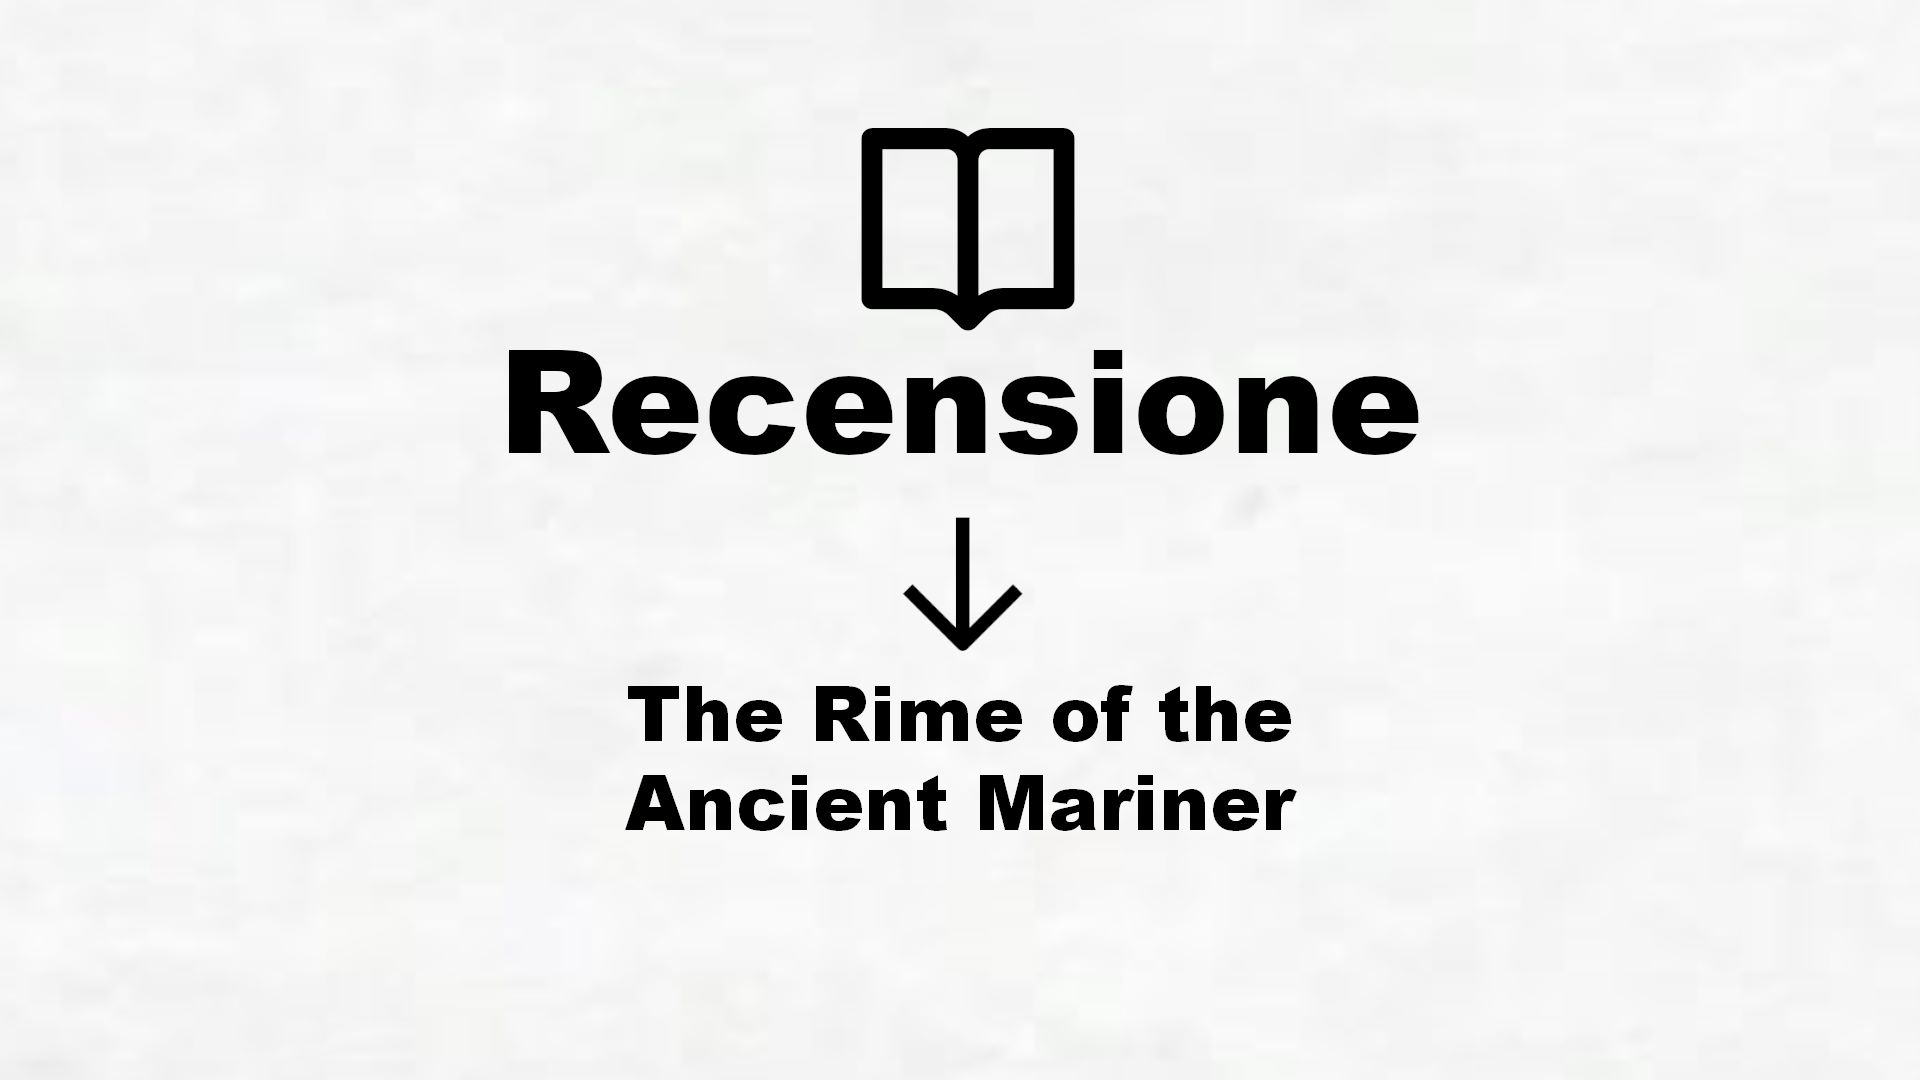 The Rime of the Ancient Mariner – Recensione Libro